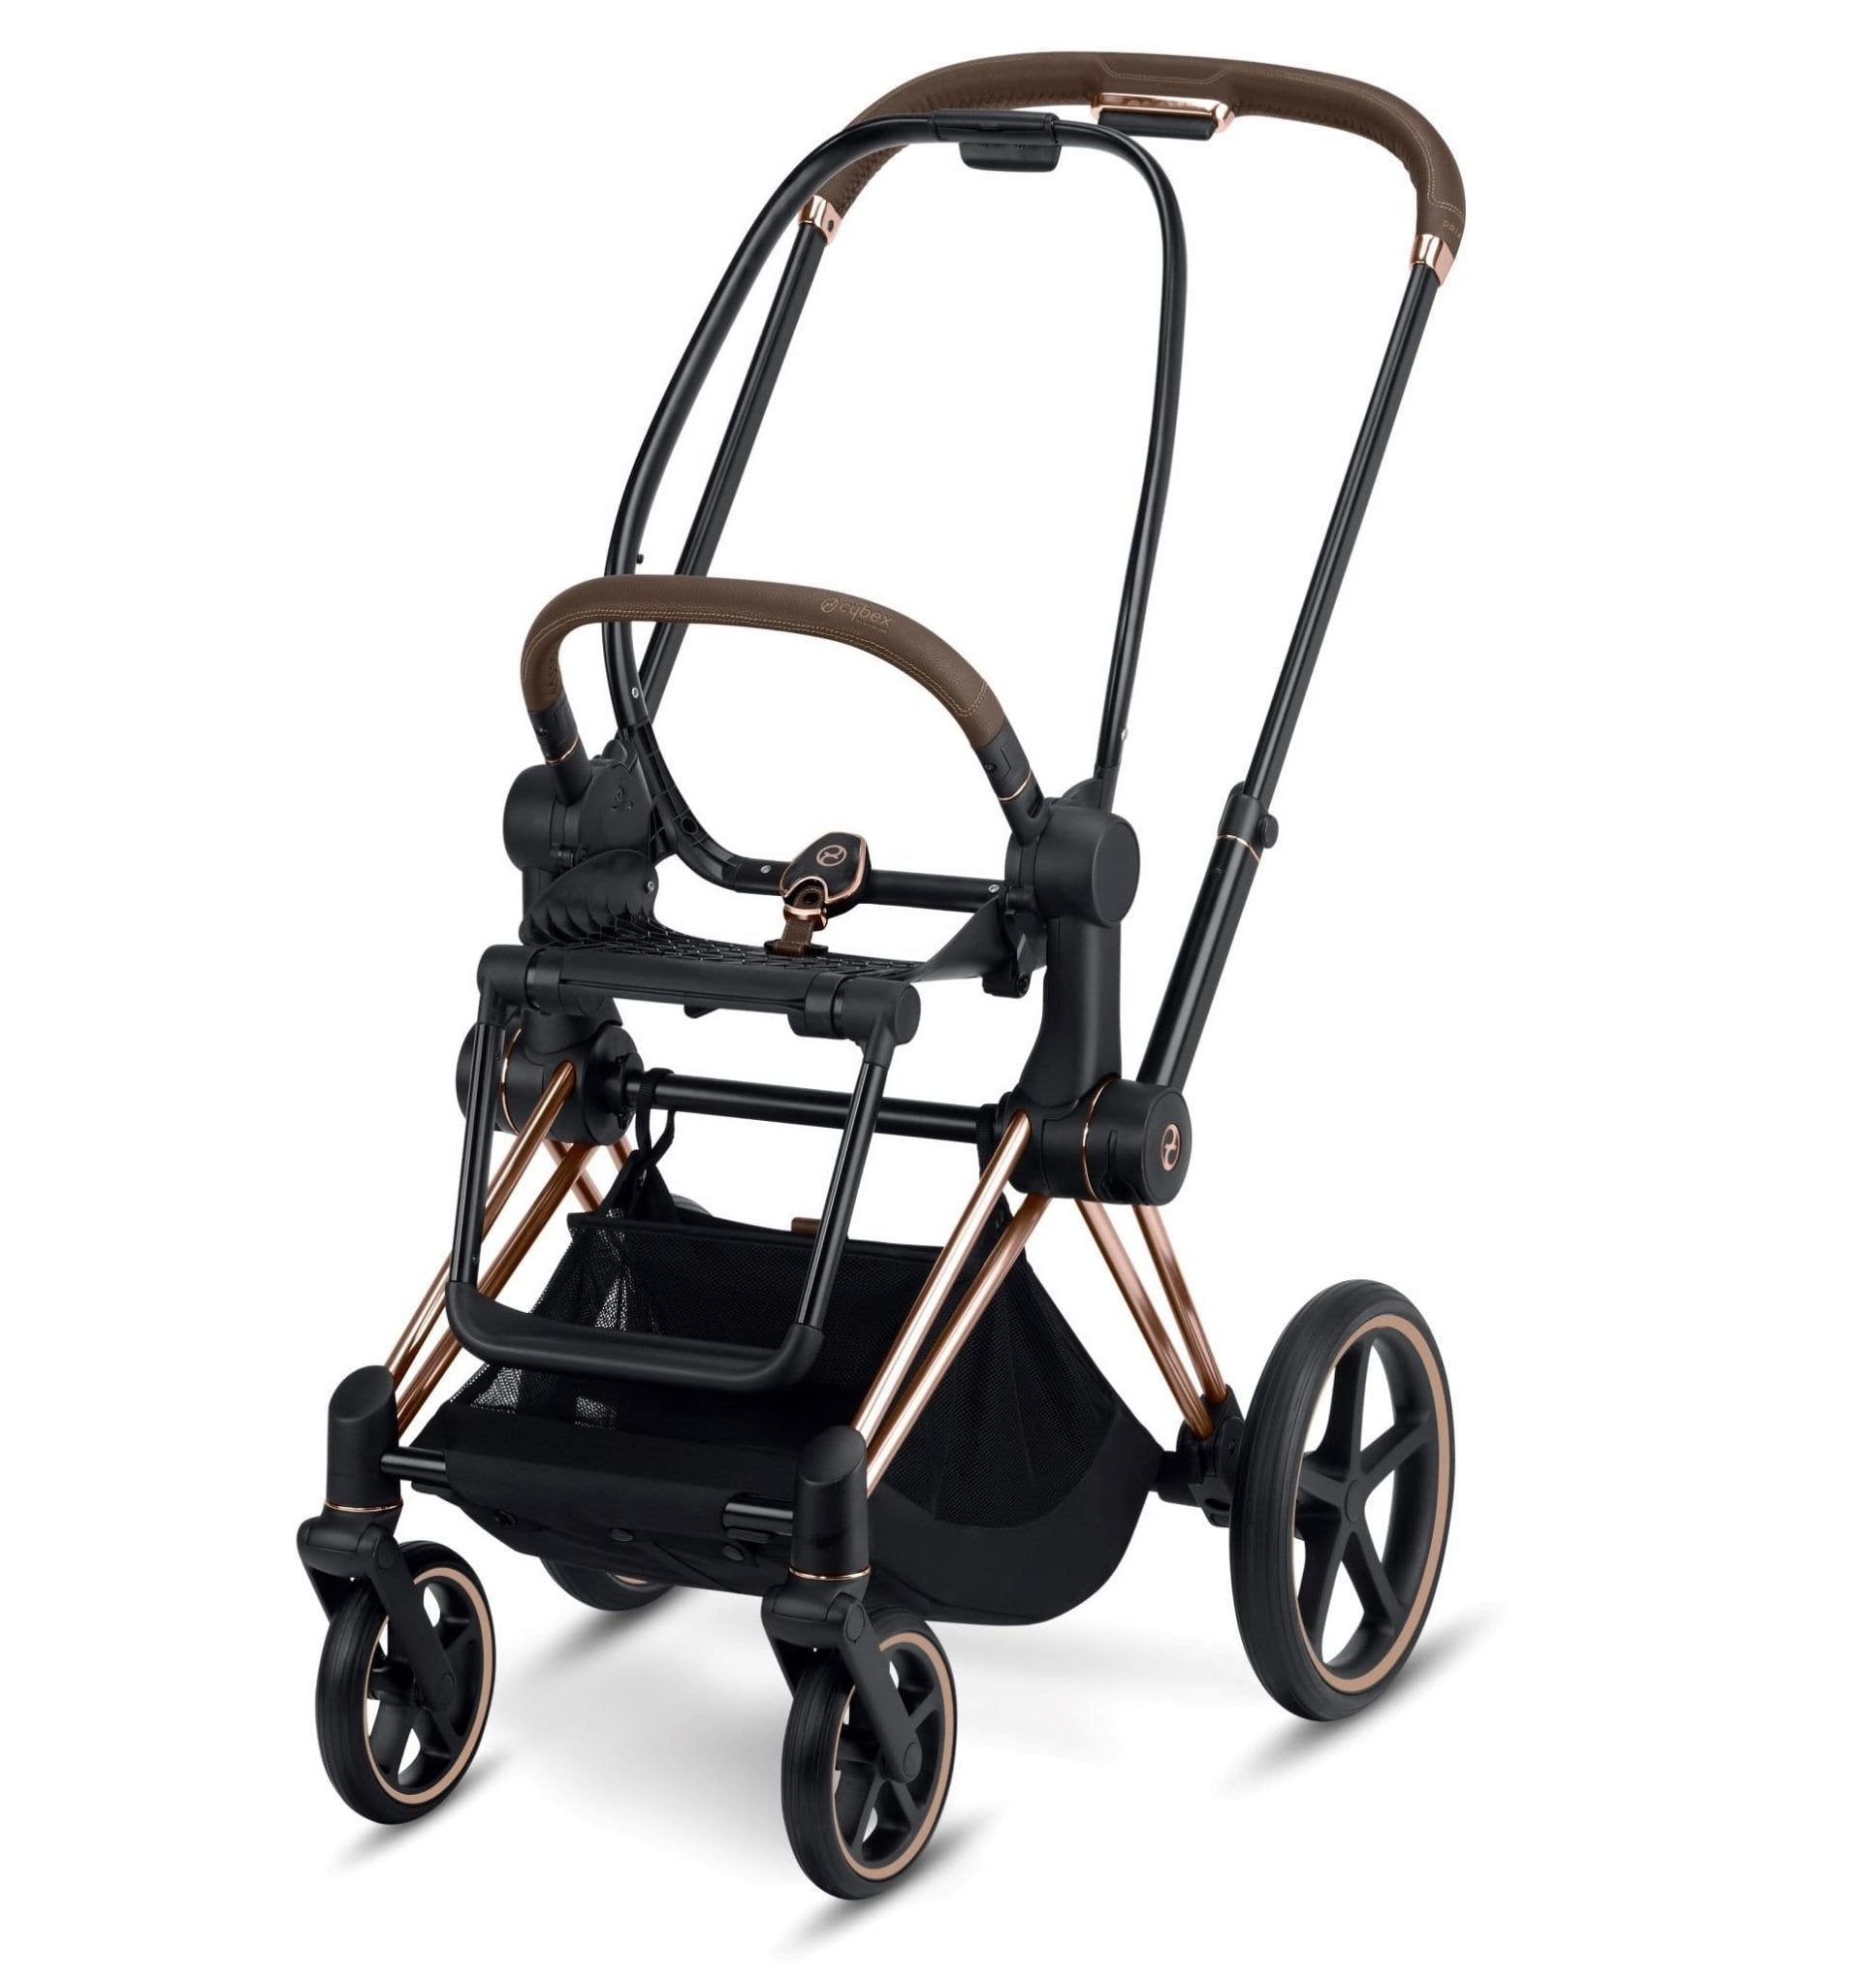 Cybex Priam Jewels of Nature Complete Stroller Bundle, Rose Gold Priam Frame, Seat Pack and Cot - ANB Baby -$1000 - $2000